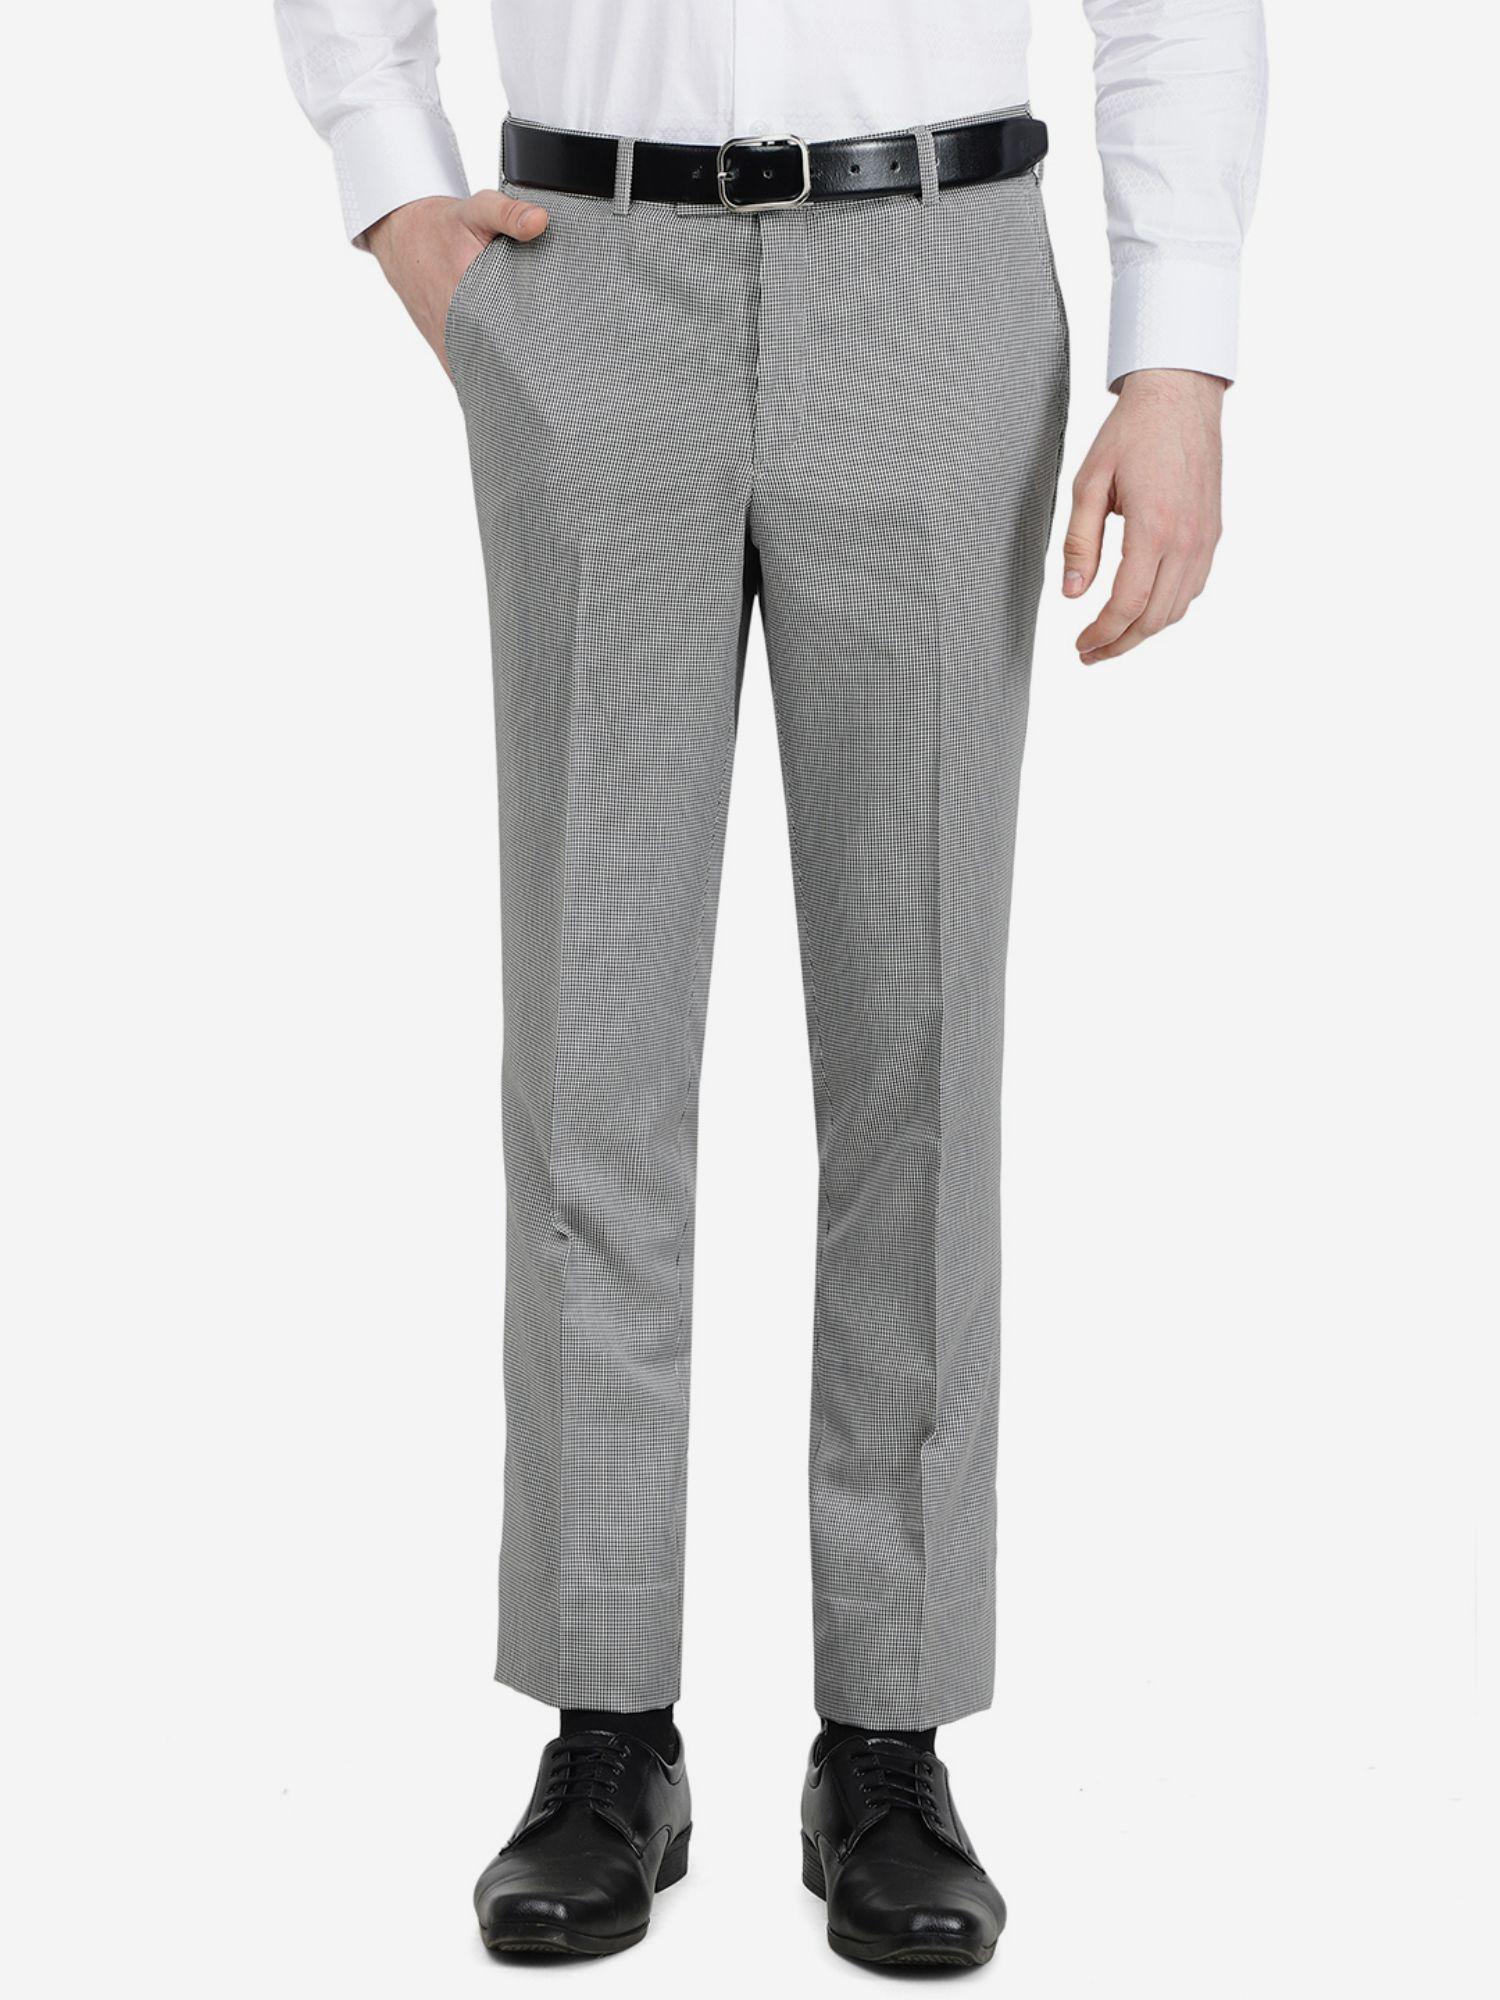 men's-checked-grey-terry-rayon-slim-fit-formal-trouser